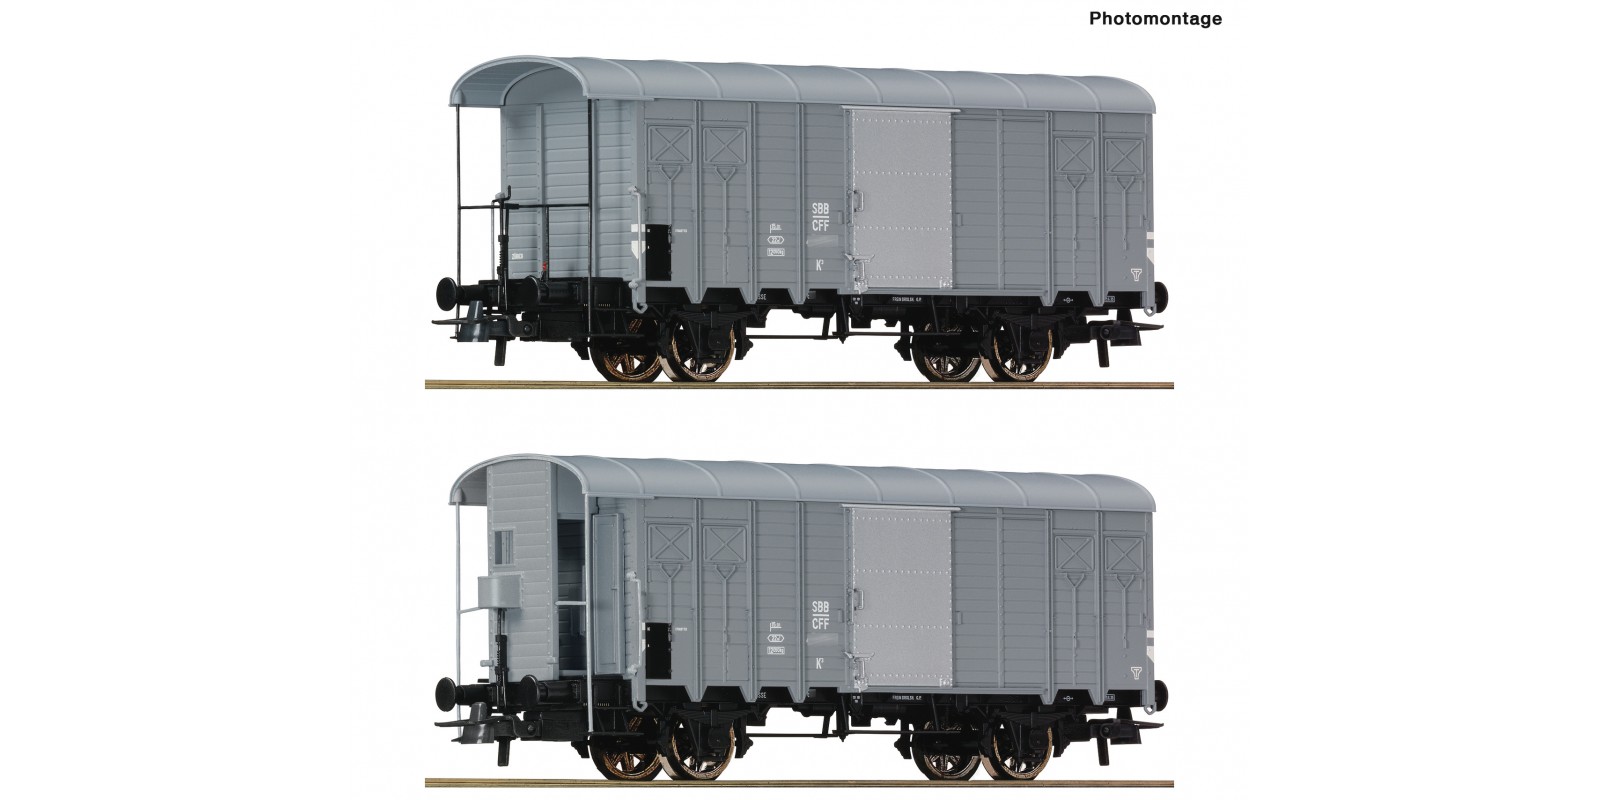 RO76646 2 piece set: Covered goods wagons